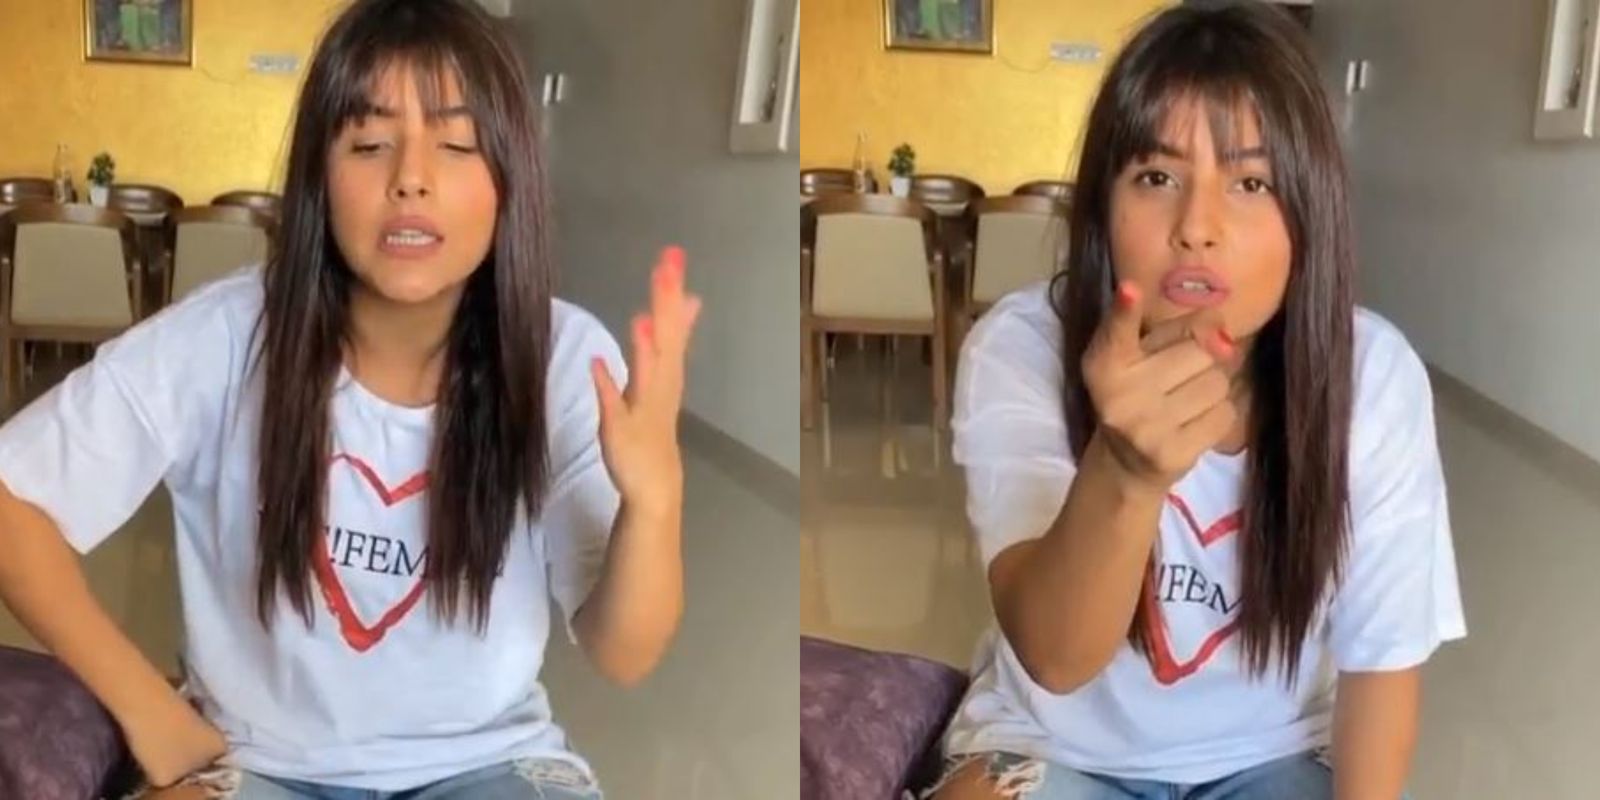 An Angry Shehnaaz Gill Blames Chinese People In Latest Video  As Coronavirus Spreads, Has This To Say To Them; Watch